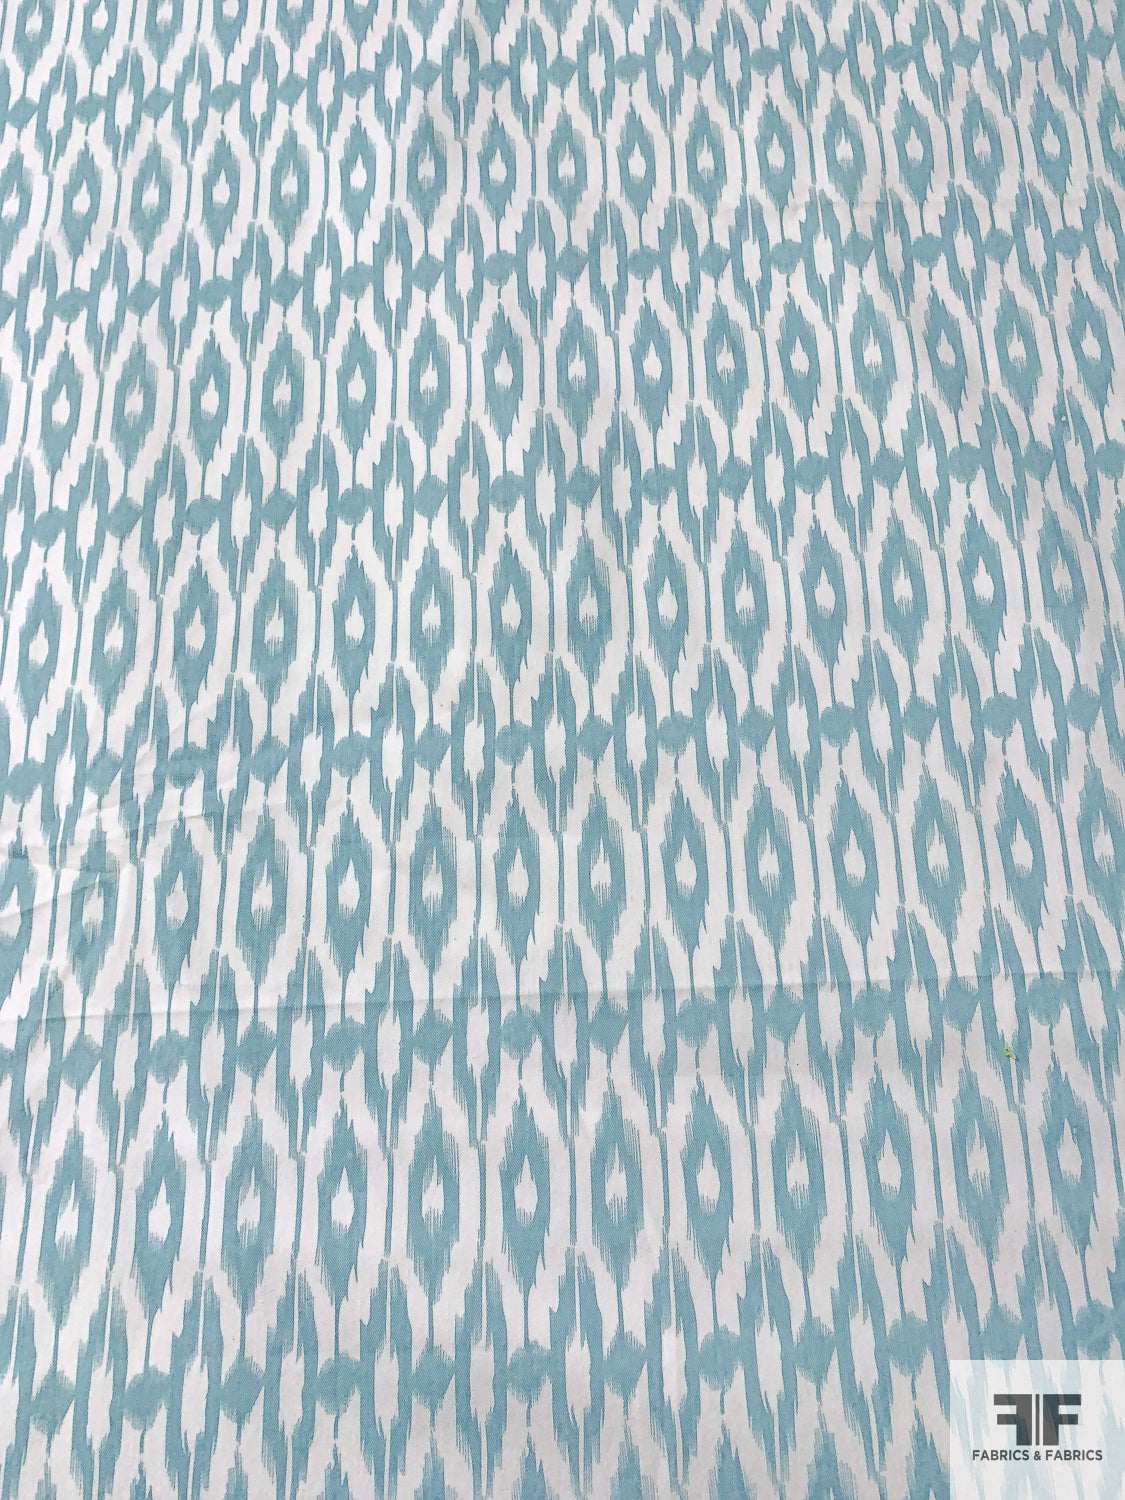 Ikat Graphic Printed Cotton Twill - Dusty Turquoise/White